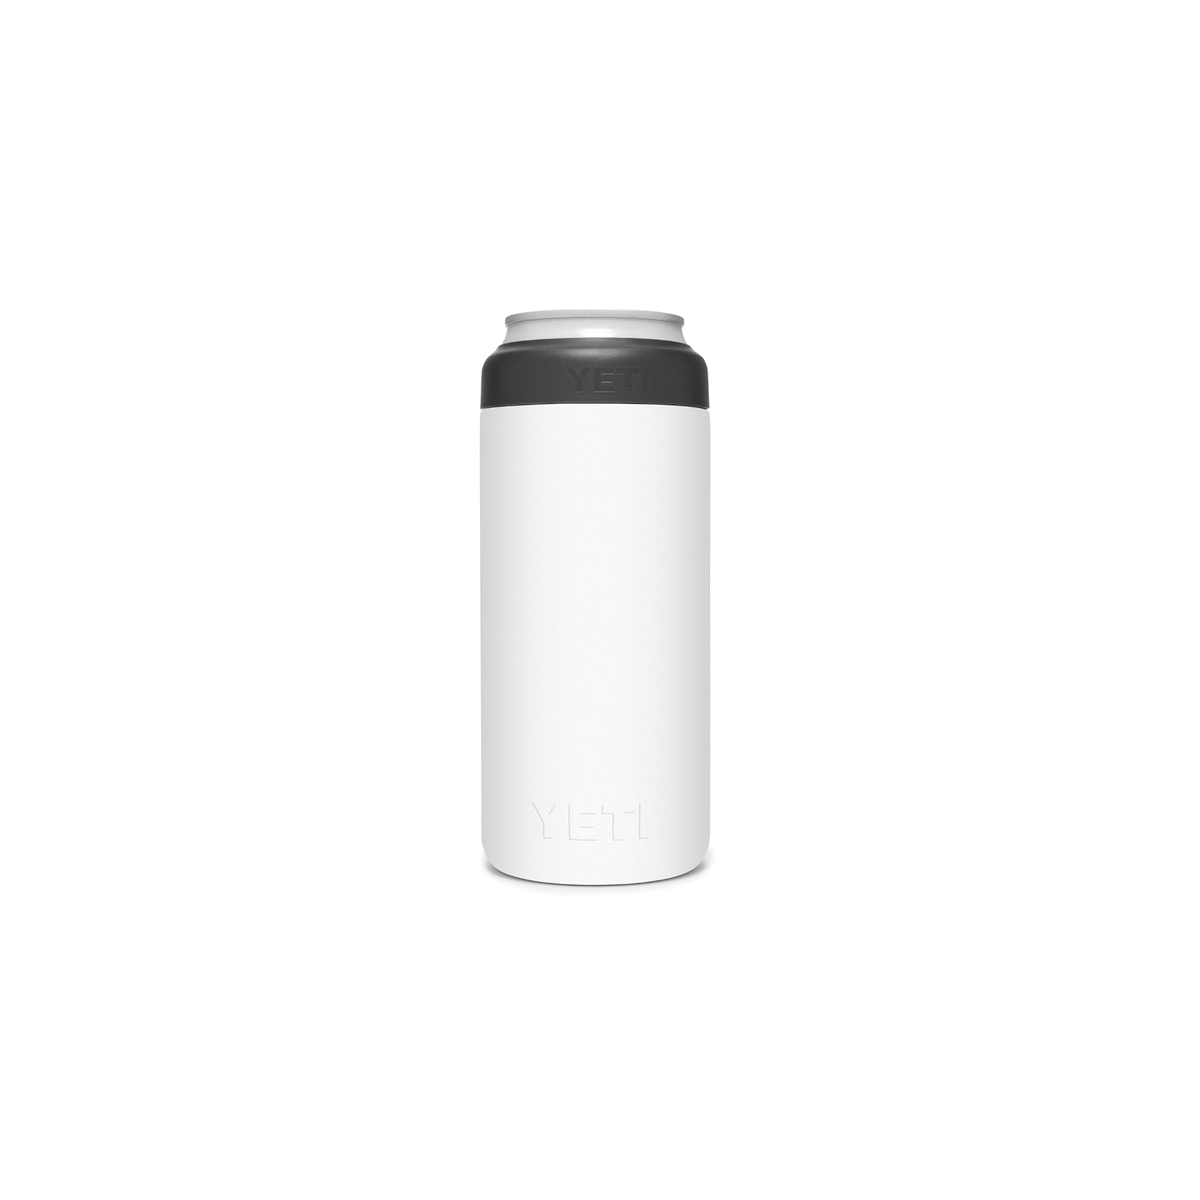 YETI Rambler 21070090082 Colster Can Insulator, 2-3/4 in Dia x 6-1/8 in H, 12 oz Can/Bottle, Stainless Steel, White - 2